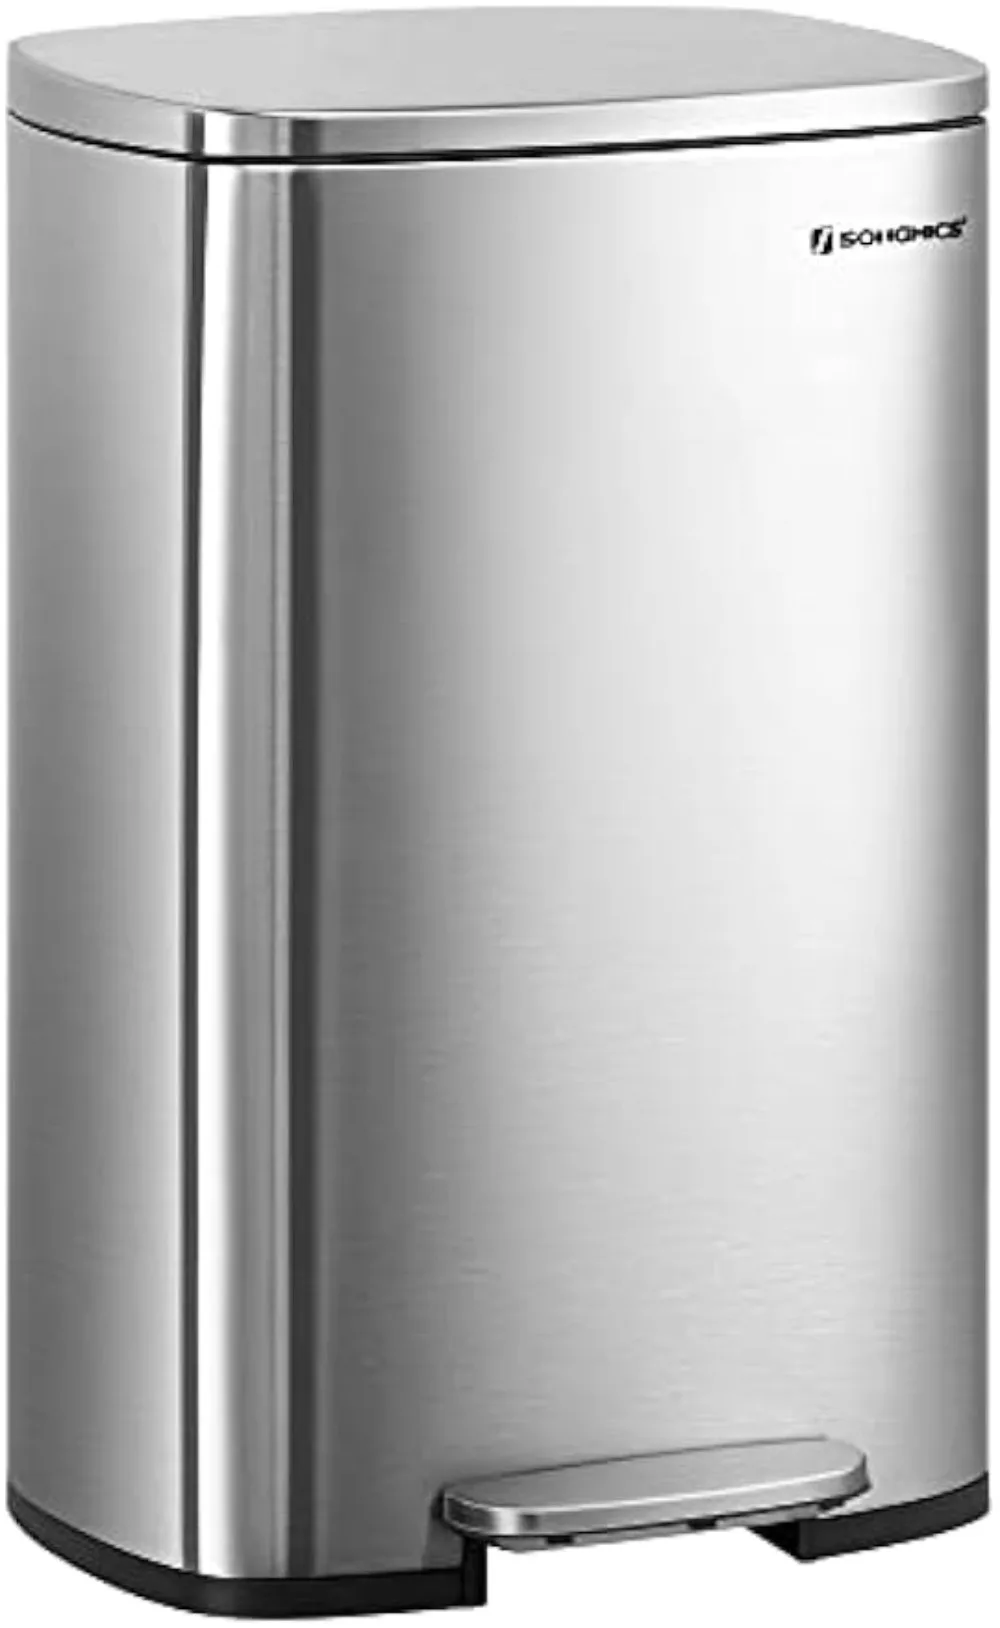 

SONGMICS 13 Gallon Trash Can, Stainless Steel Kitchen Garbage Can, Recycling or Waste Bin, Soft Close, Step-On Pedal, Removable